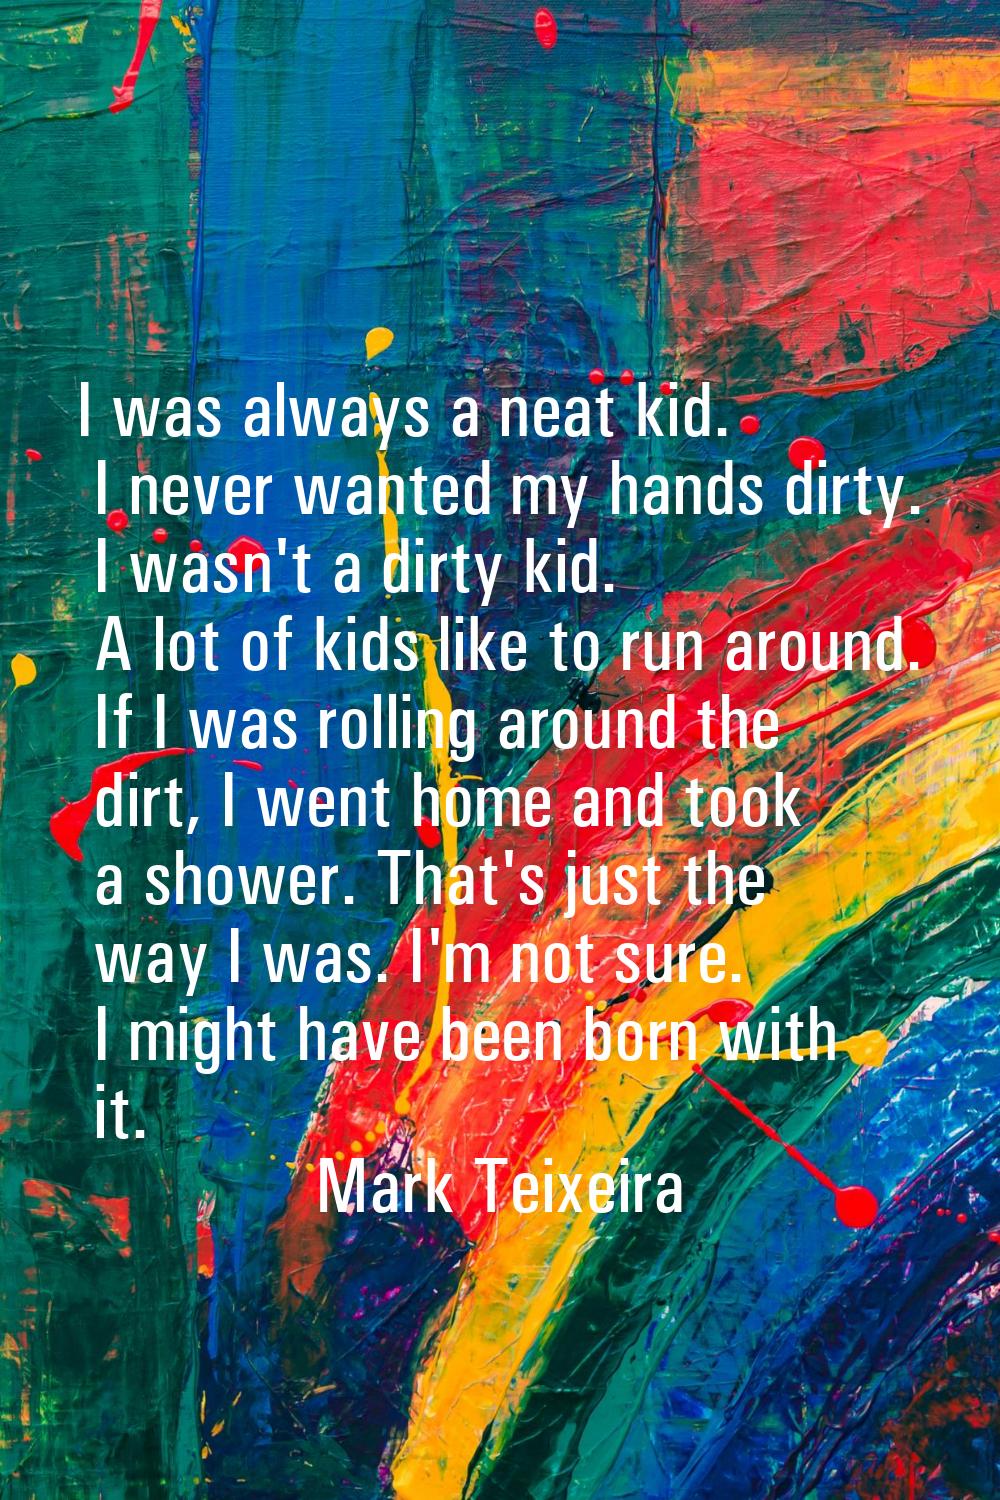 I was always a neat kid. I never wanted my hands dirty. I wasn't a dirty kid. A lot of kids like to